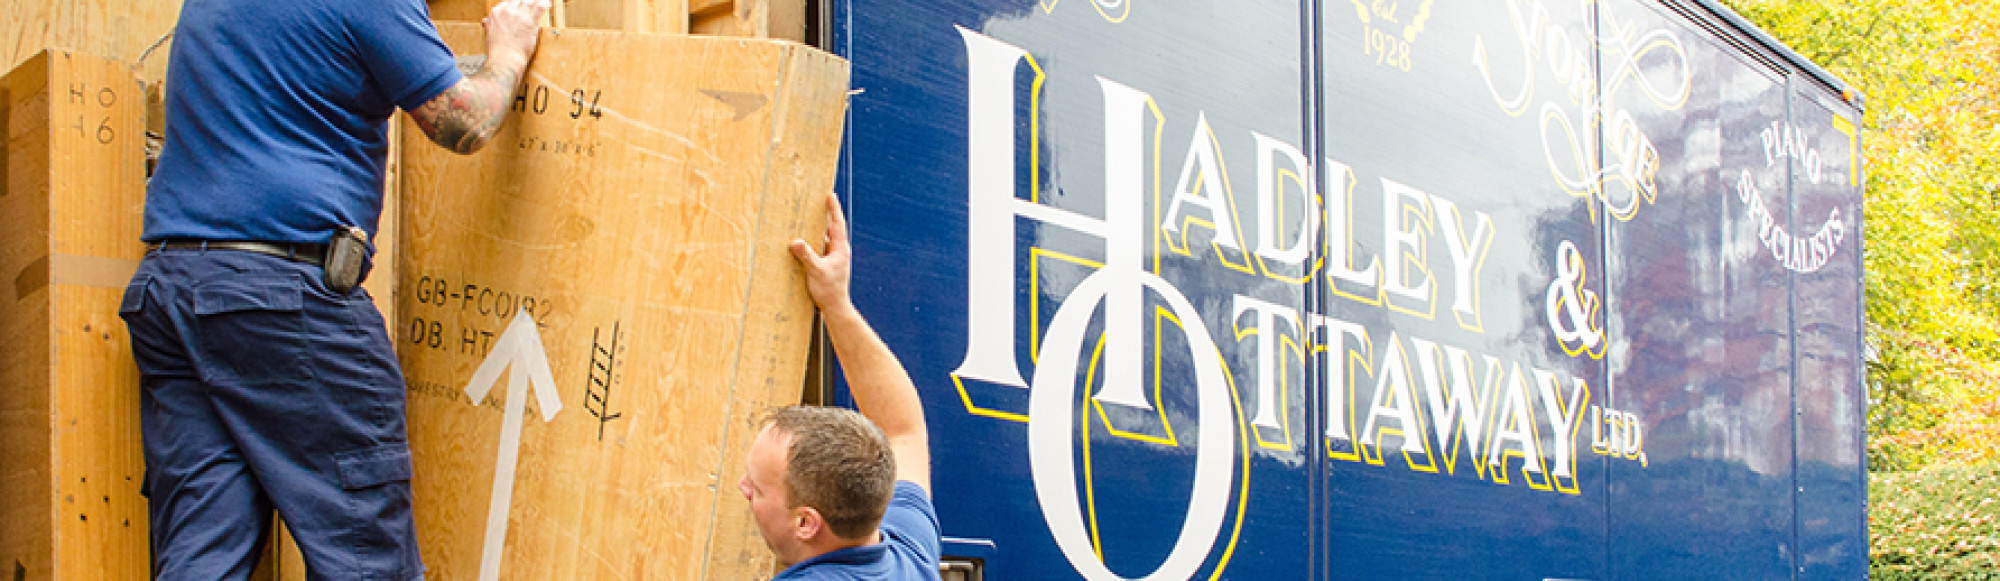 hadley and ottaway removals